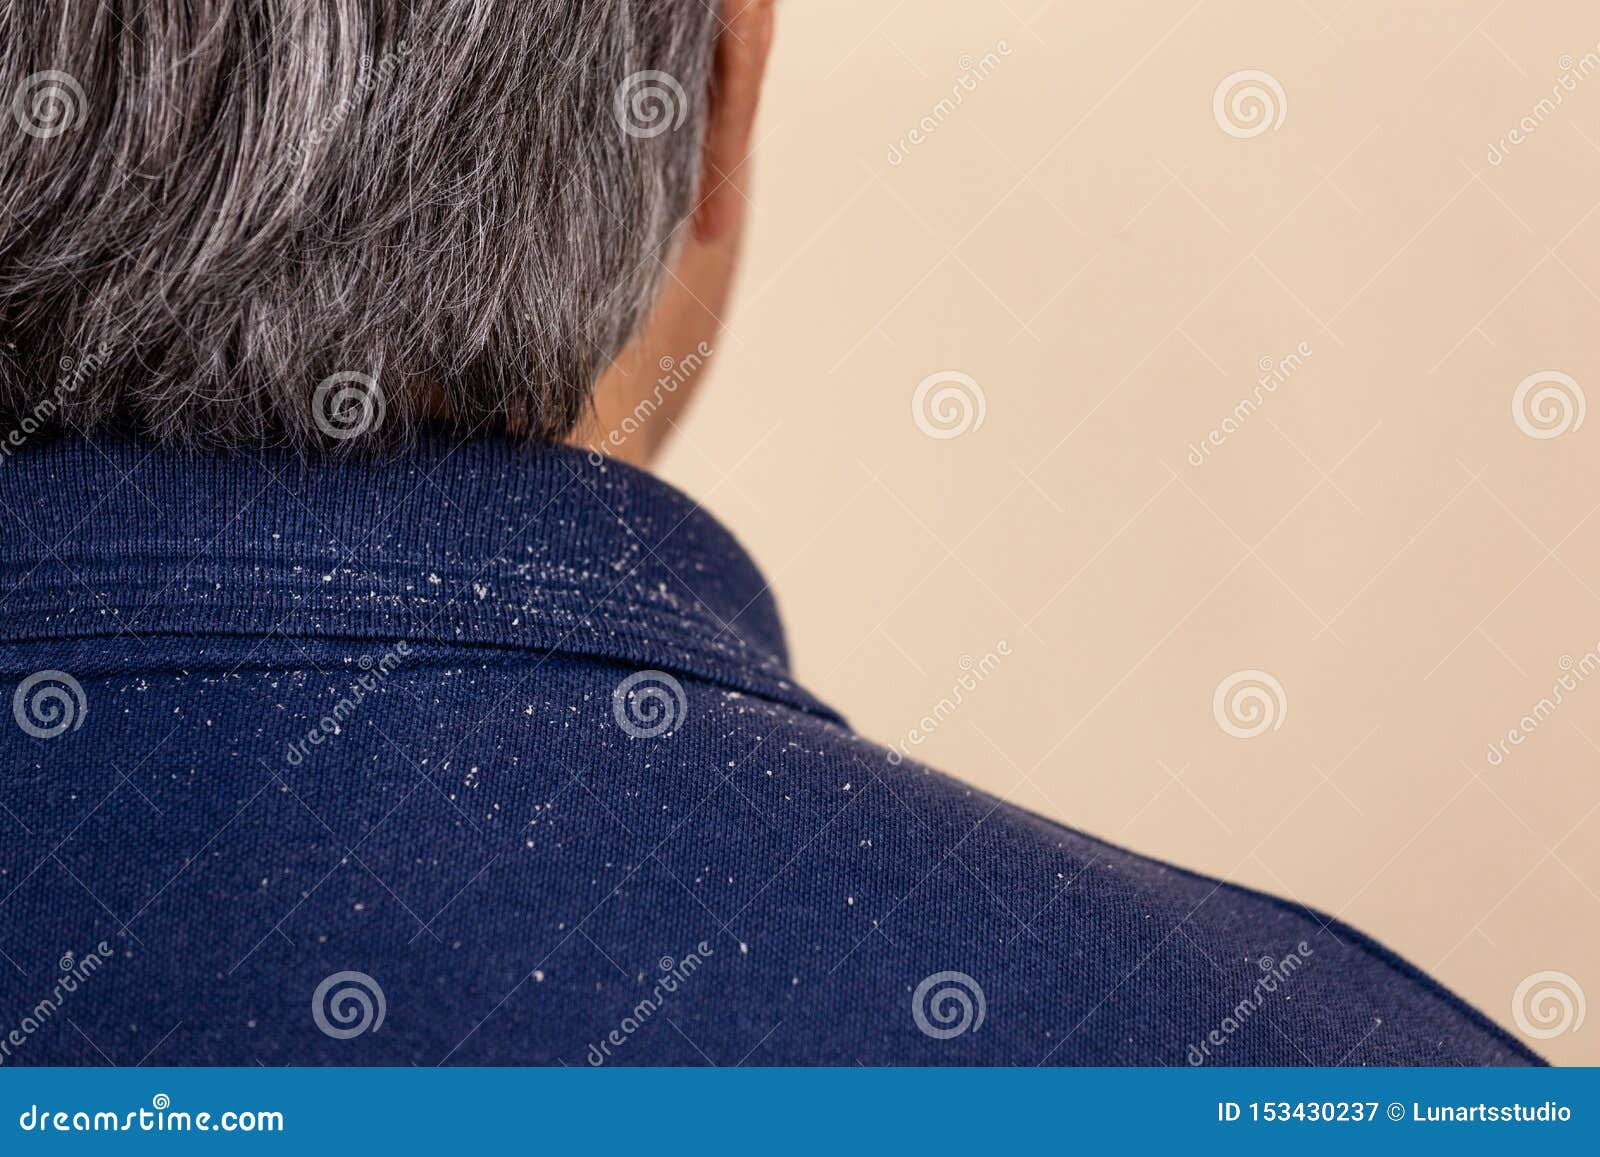 close-up view of a man who has a lot of dandruff from his hair on his shirt and shoulders